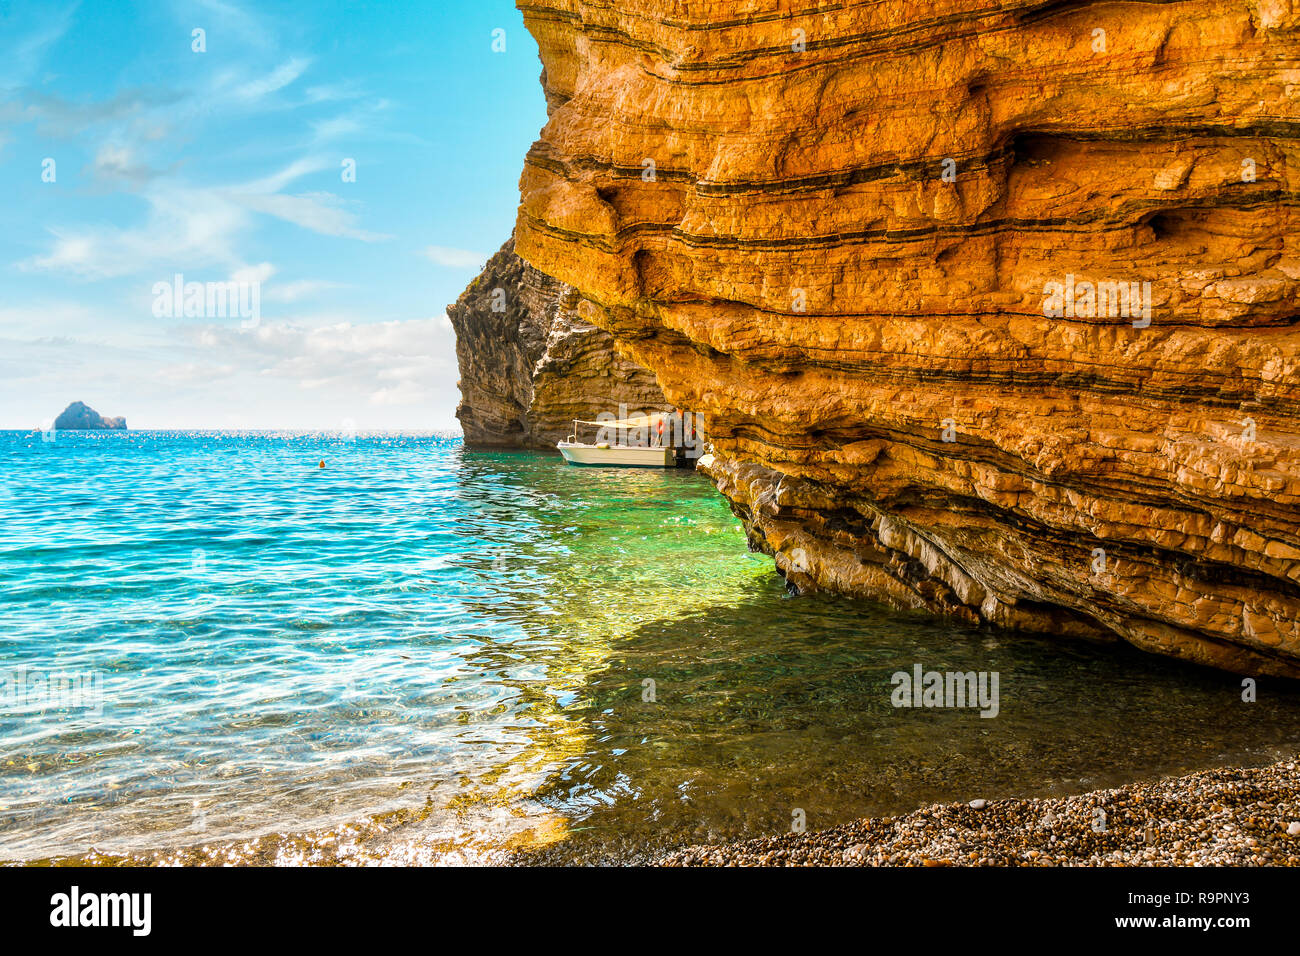 A small boat docks against a rocky cove at Chomi Beach, also known as Paradise Beach, on a sunny summer day on the Greek island of Corfu, Greece. Stock Photo